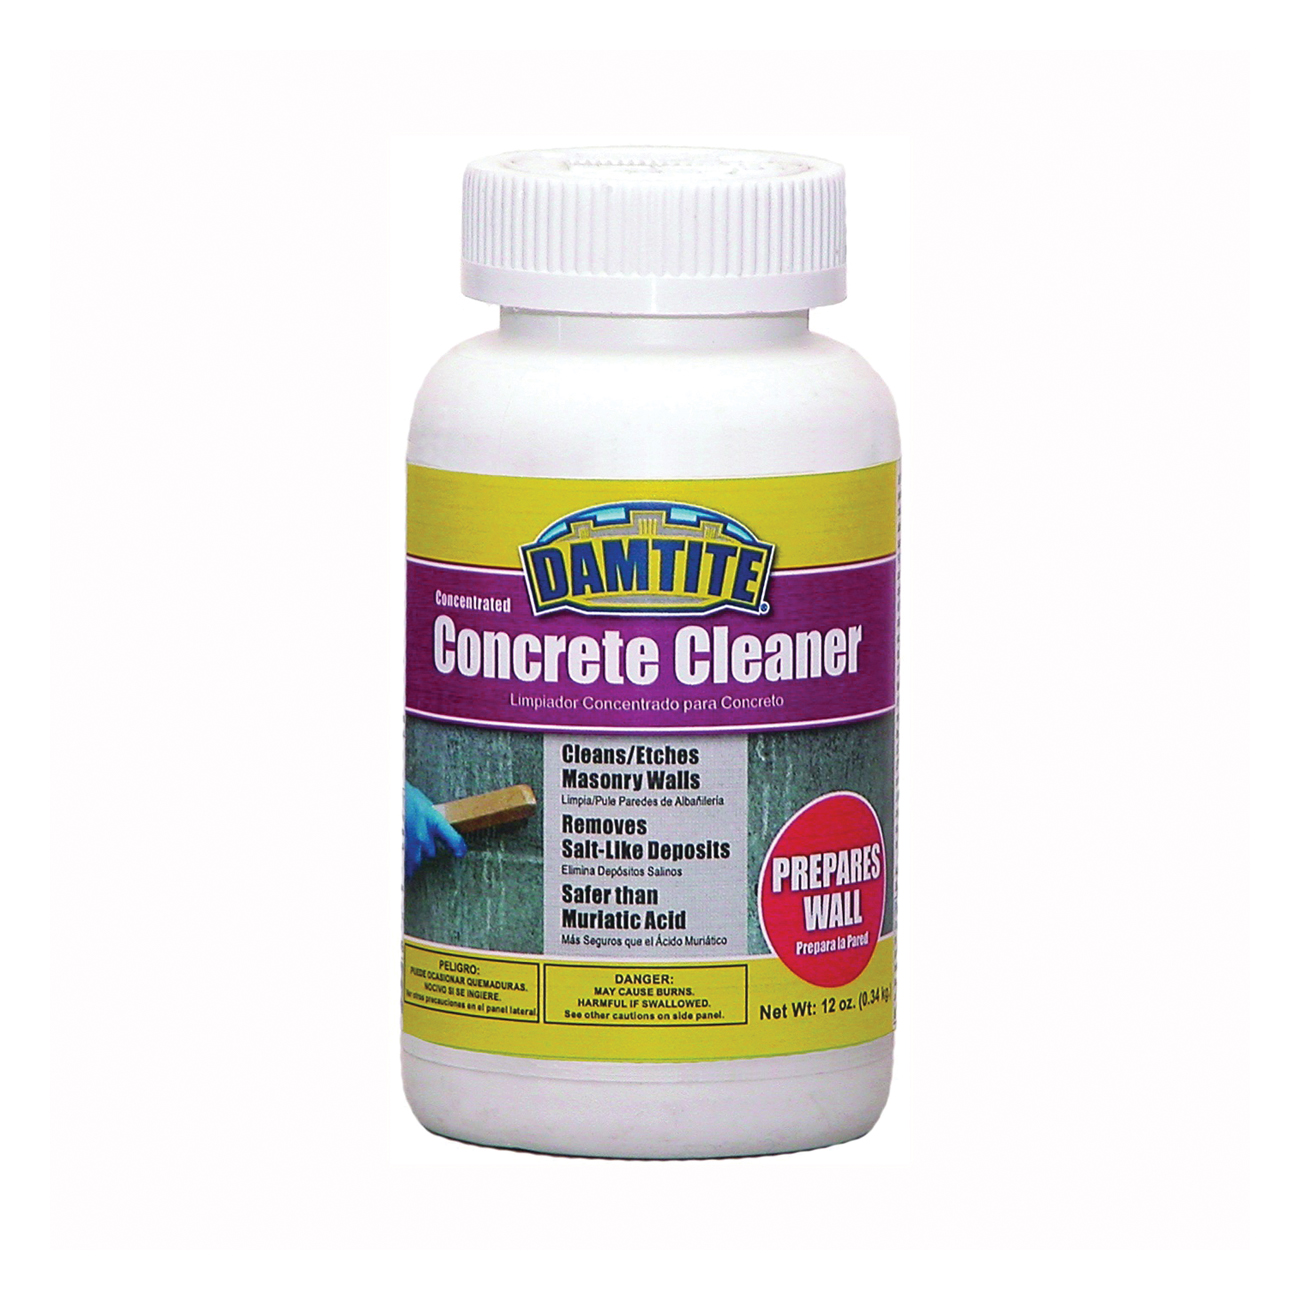 09712 Concrete Cleaner, Solid, Odorless, Opaque White, 12 oz, Bottle